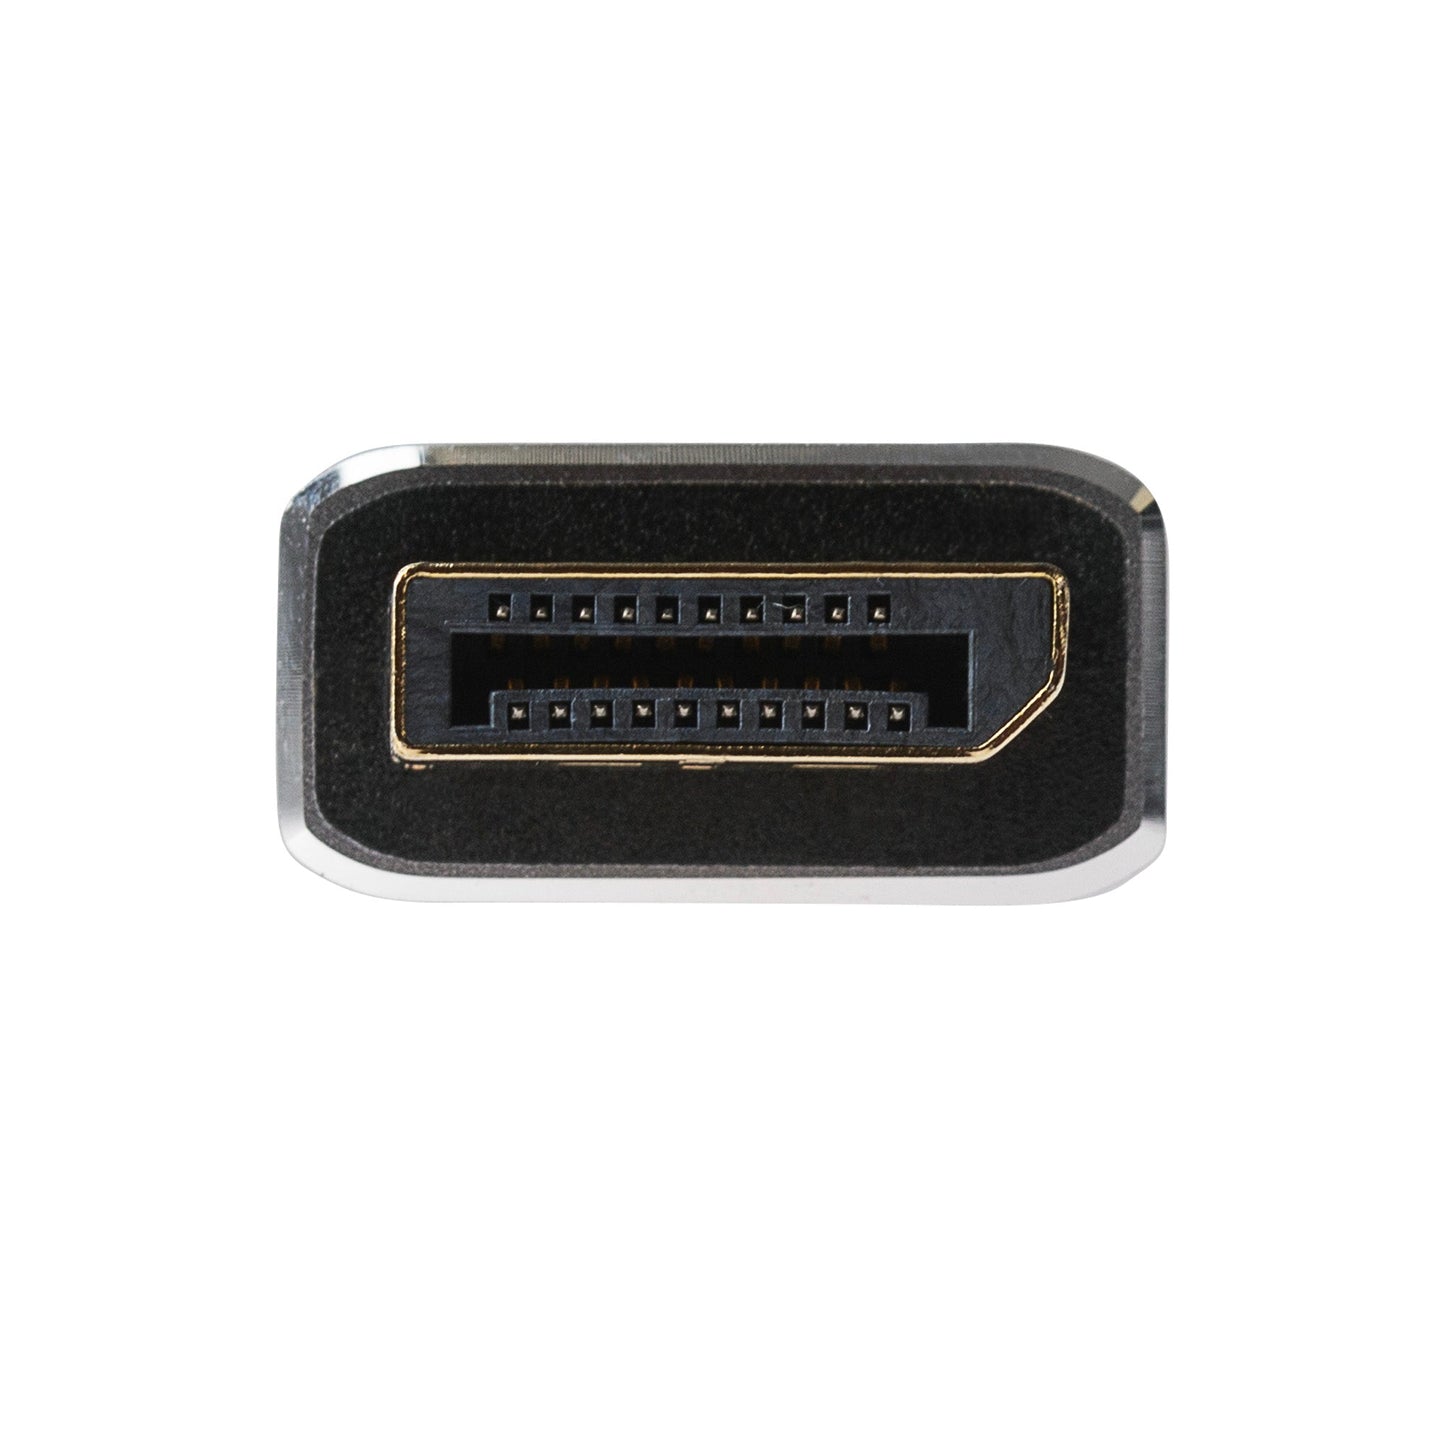 Maplin 8K USB-C to DisplayPort V1.4 Cable with Gold Connectors - Black & Silver, 2m - maplin.co.uk